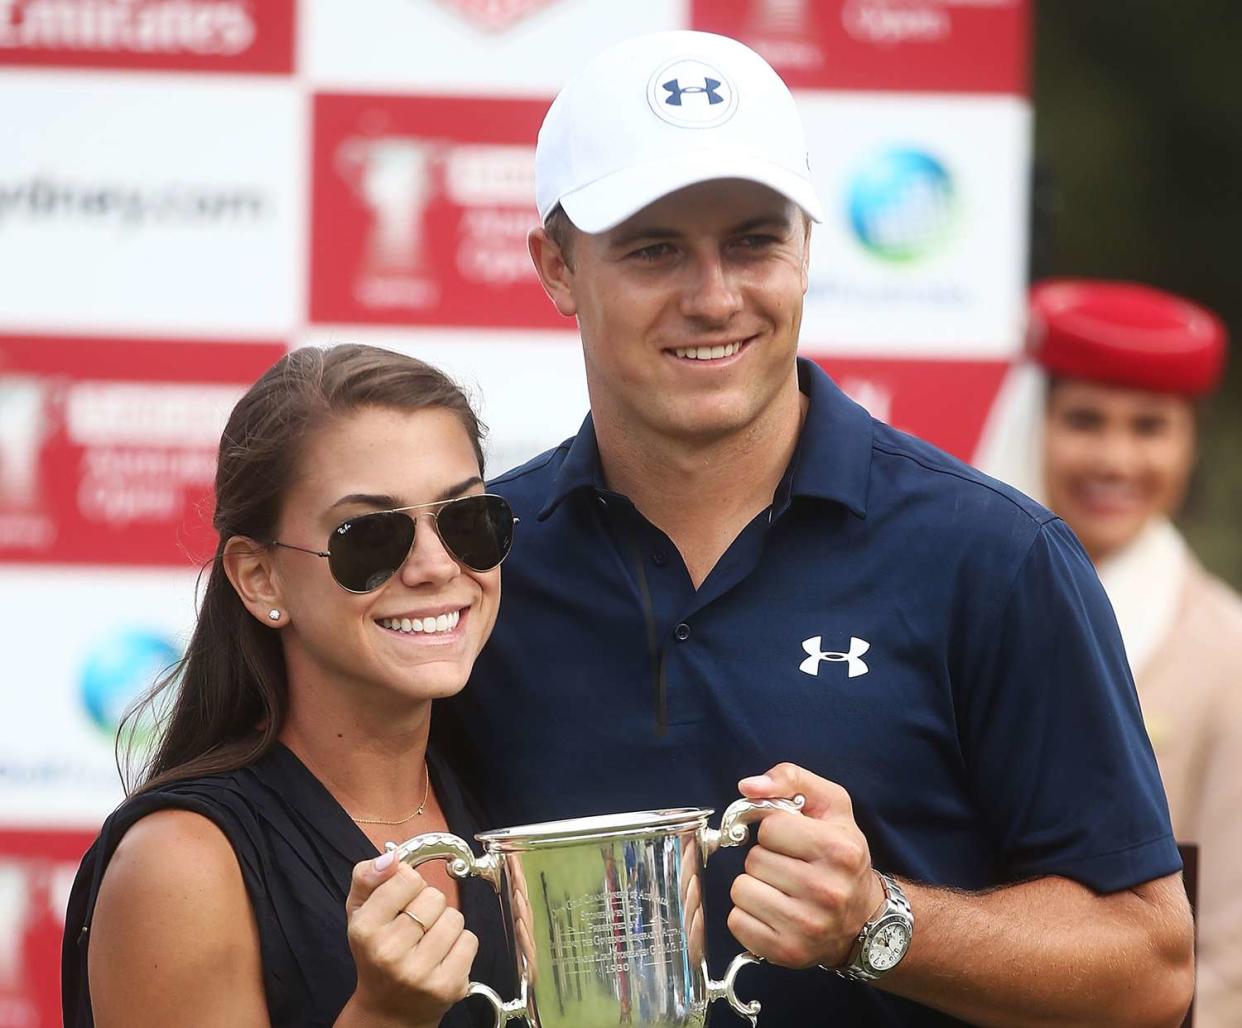 Jordan Spieth of the United States and girlfriend Annie Verret pose with the Stonehaven trophy after winning the 2016 Australian Open during day four of the 2016 Australian golf Open at Royal Sydney Golf Club on November 20, 2016 in Sydney, Australia